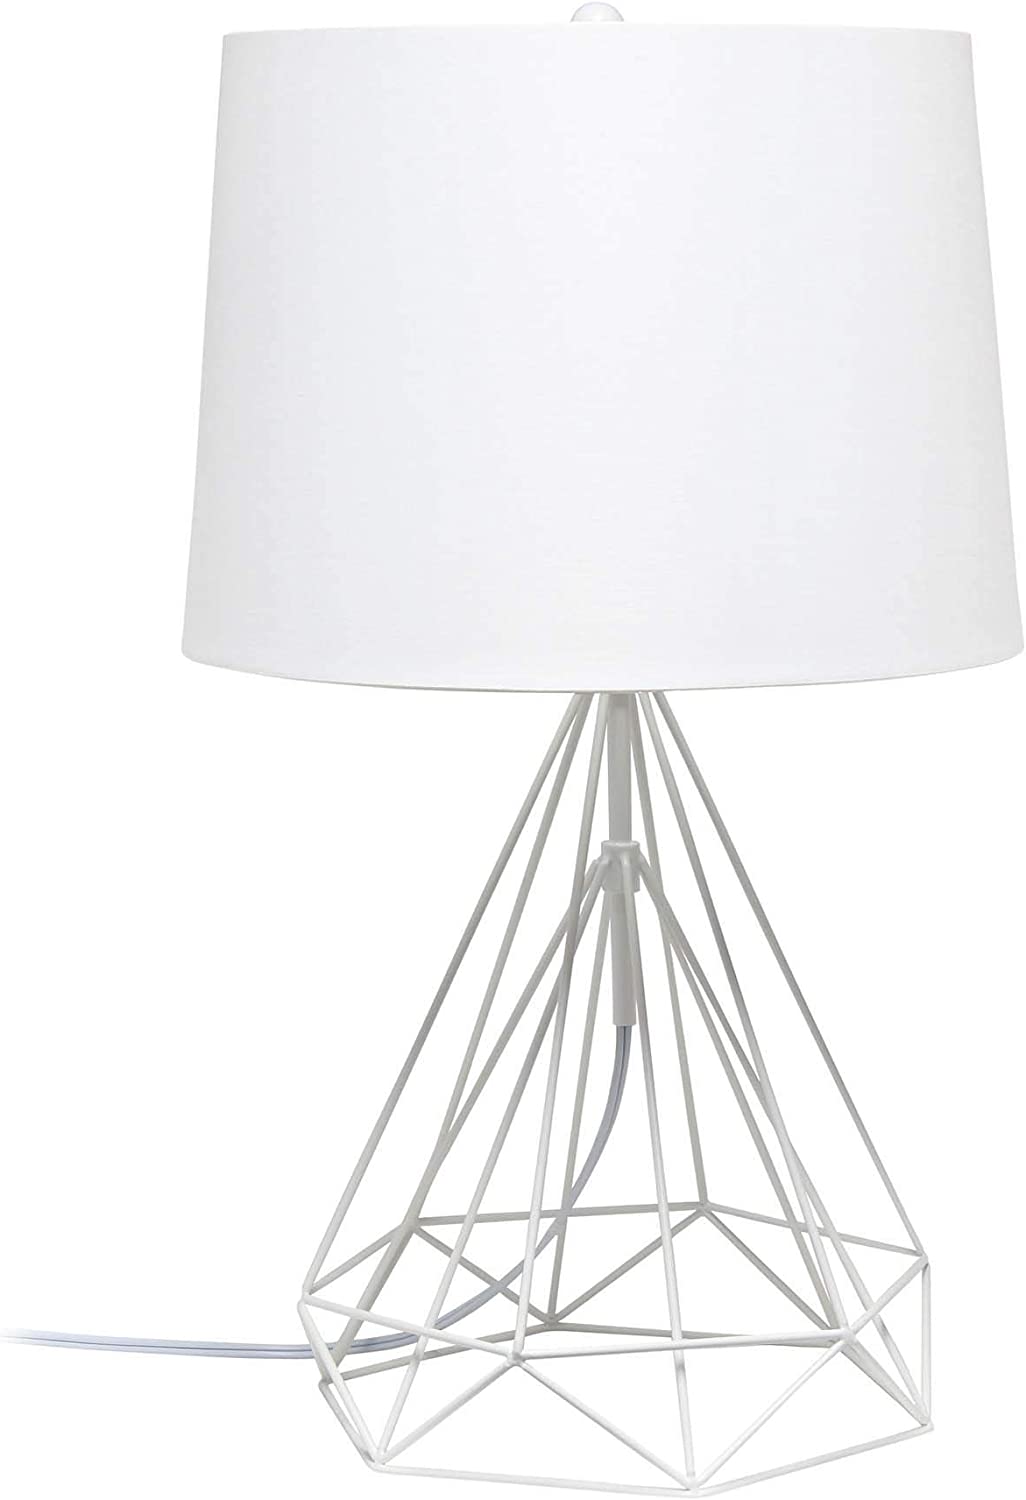 Lalia Home Decorative Geometric White Matte Wired Table Lamp with Fabric Shade